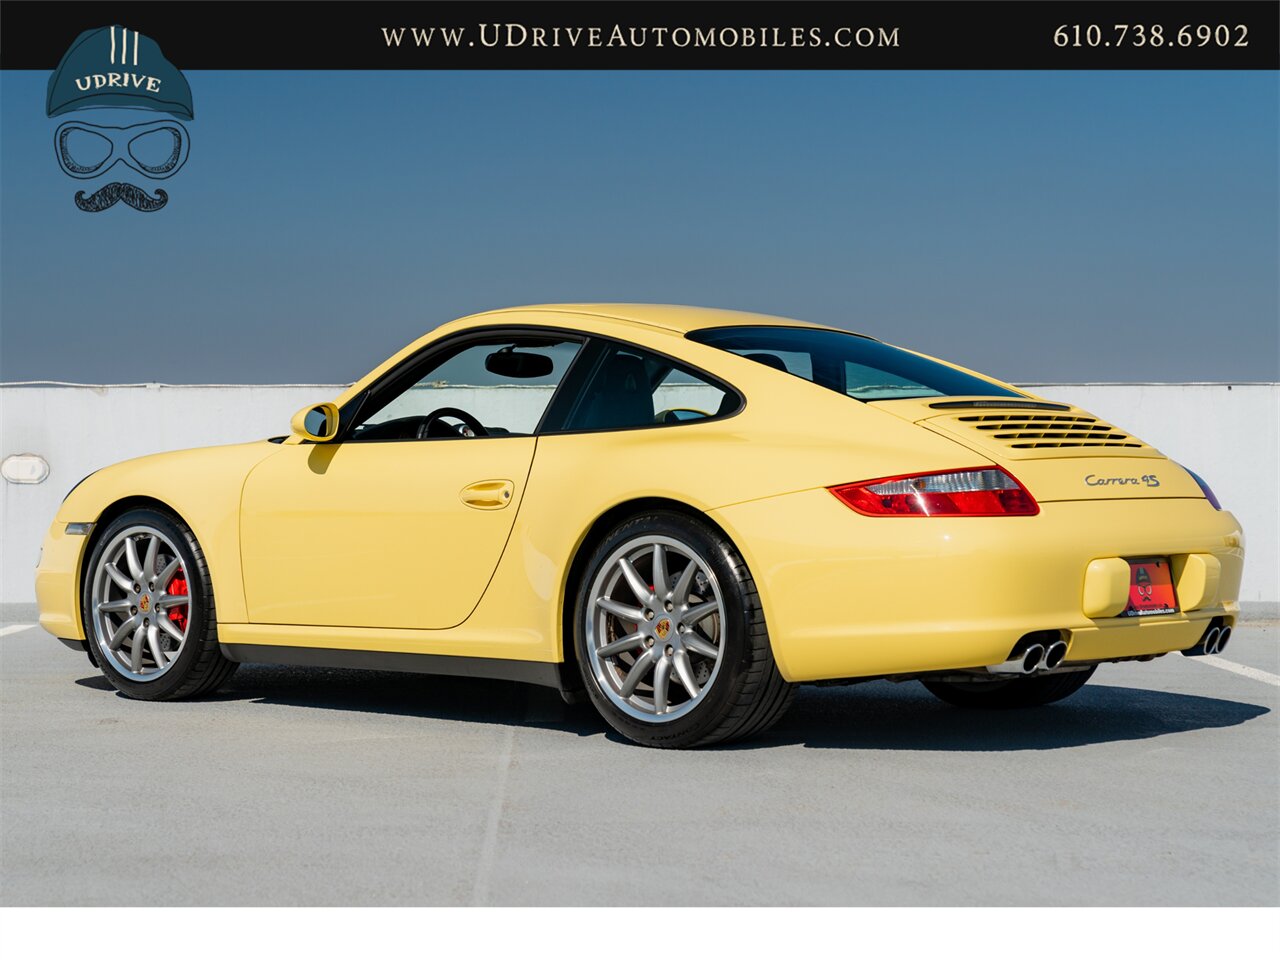 2007 Porsche 911 Carrera 4S 997 C4S Paint To Sample Pastel Yellow  6 Speed Sport Chrono Full Leather Yellow Gauges - Photo 22 - West Chester, PA 19382